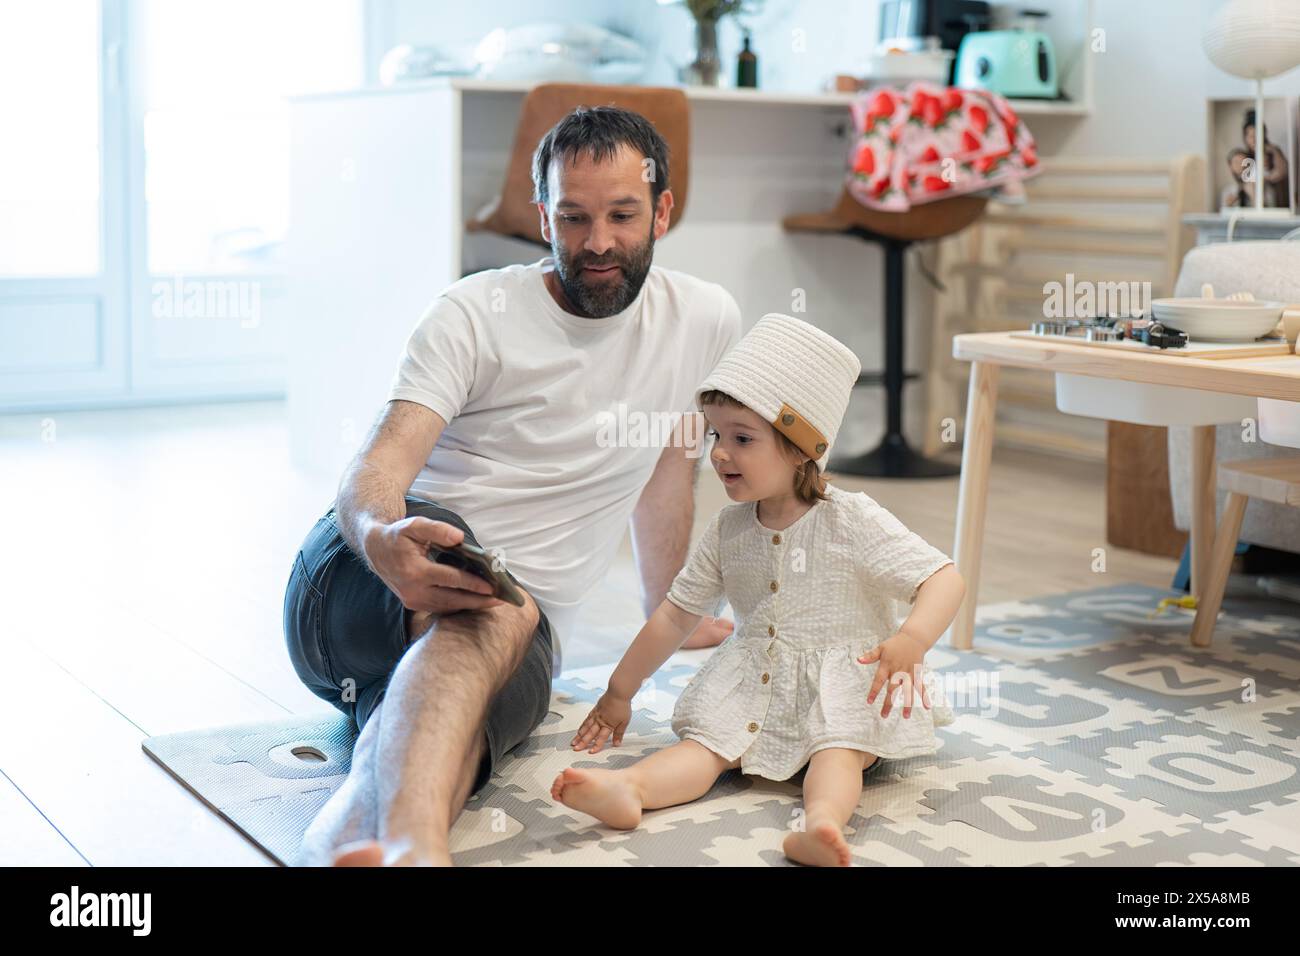 A heartwarming scene of a father and his young daughter sharing a moment together while relaxing on the living room floor Stock Photo